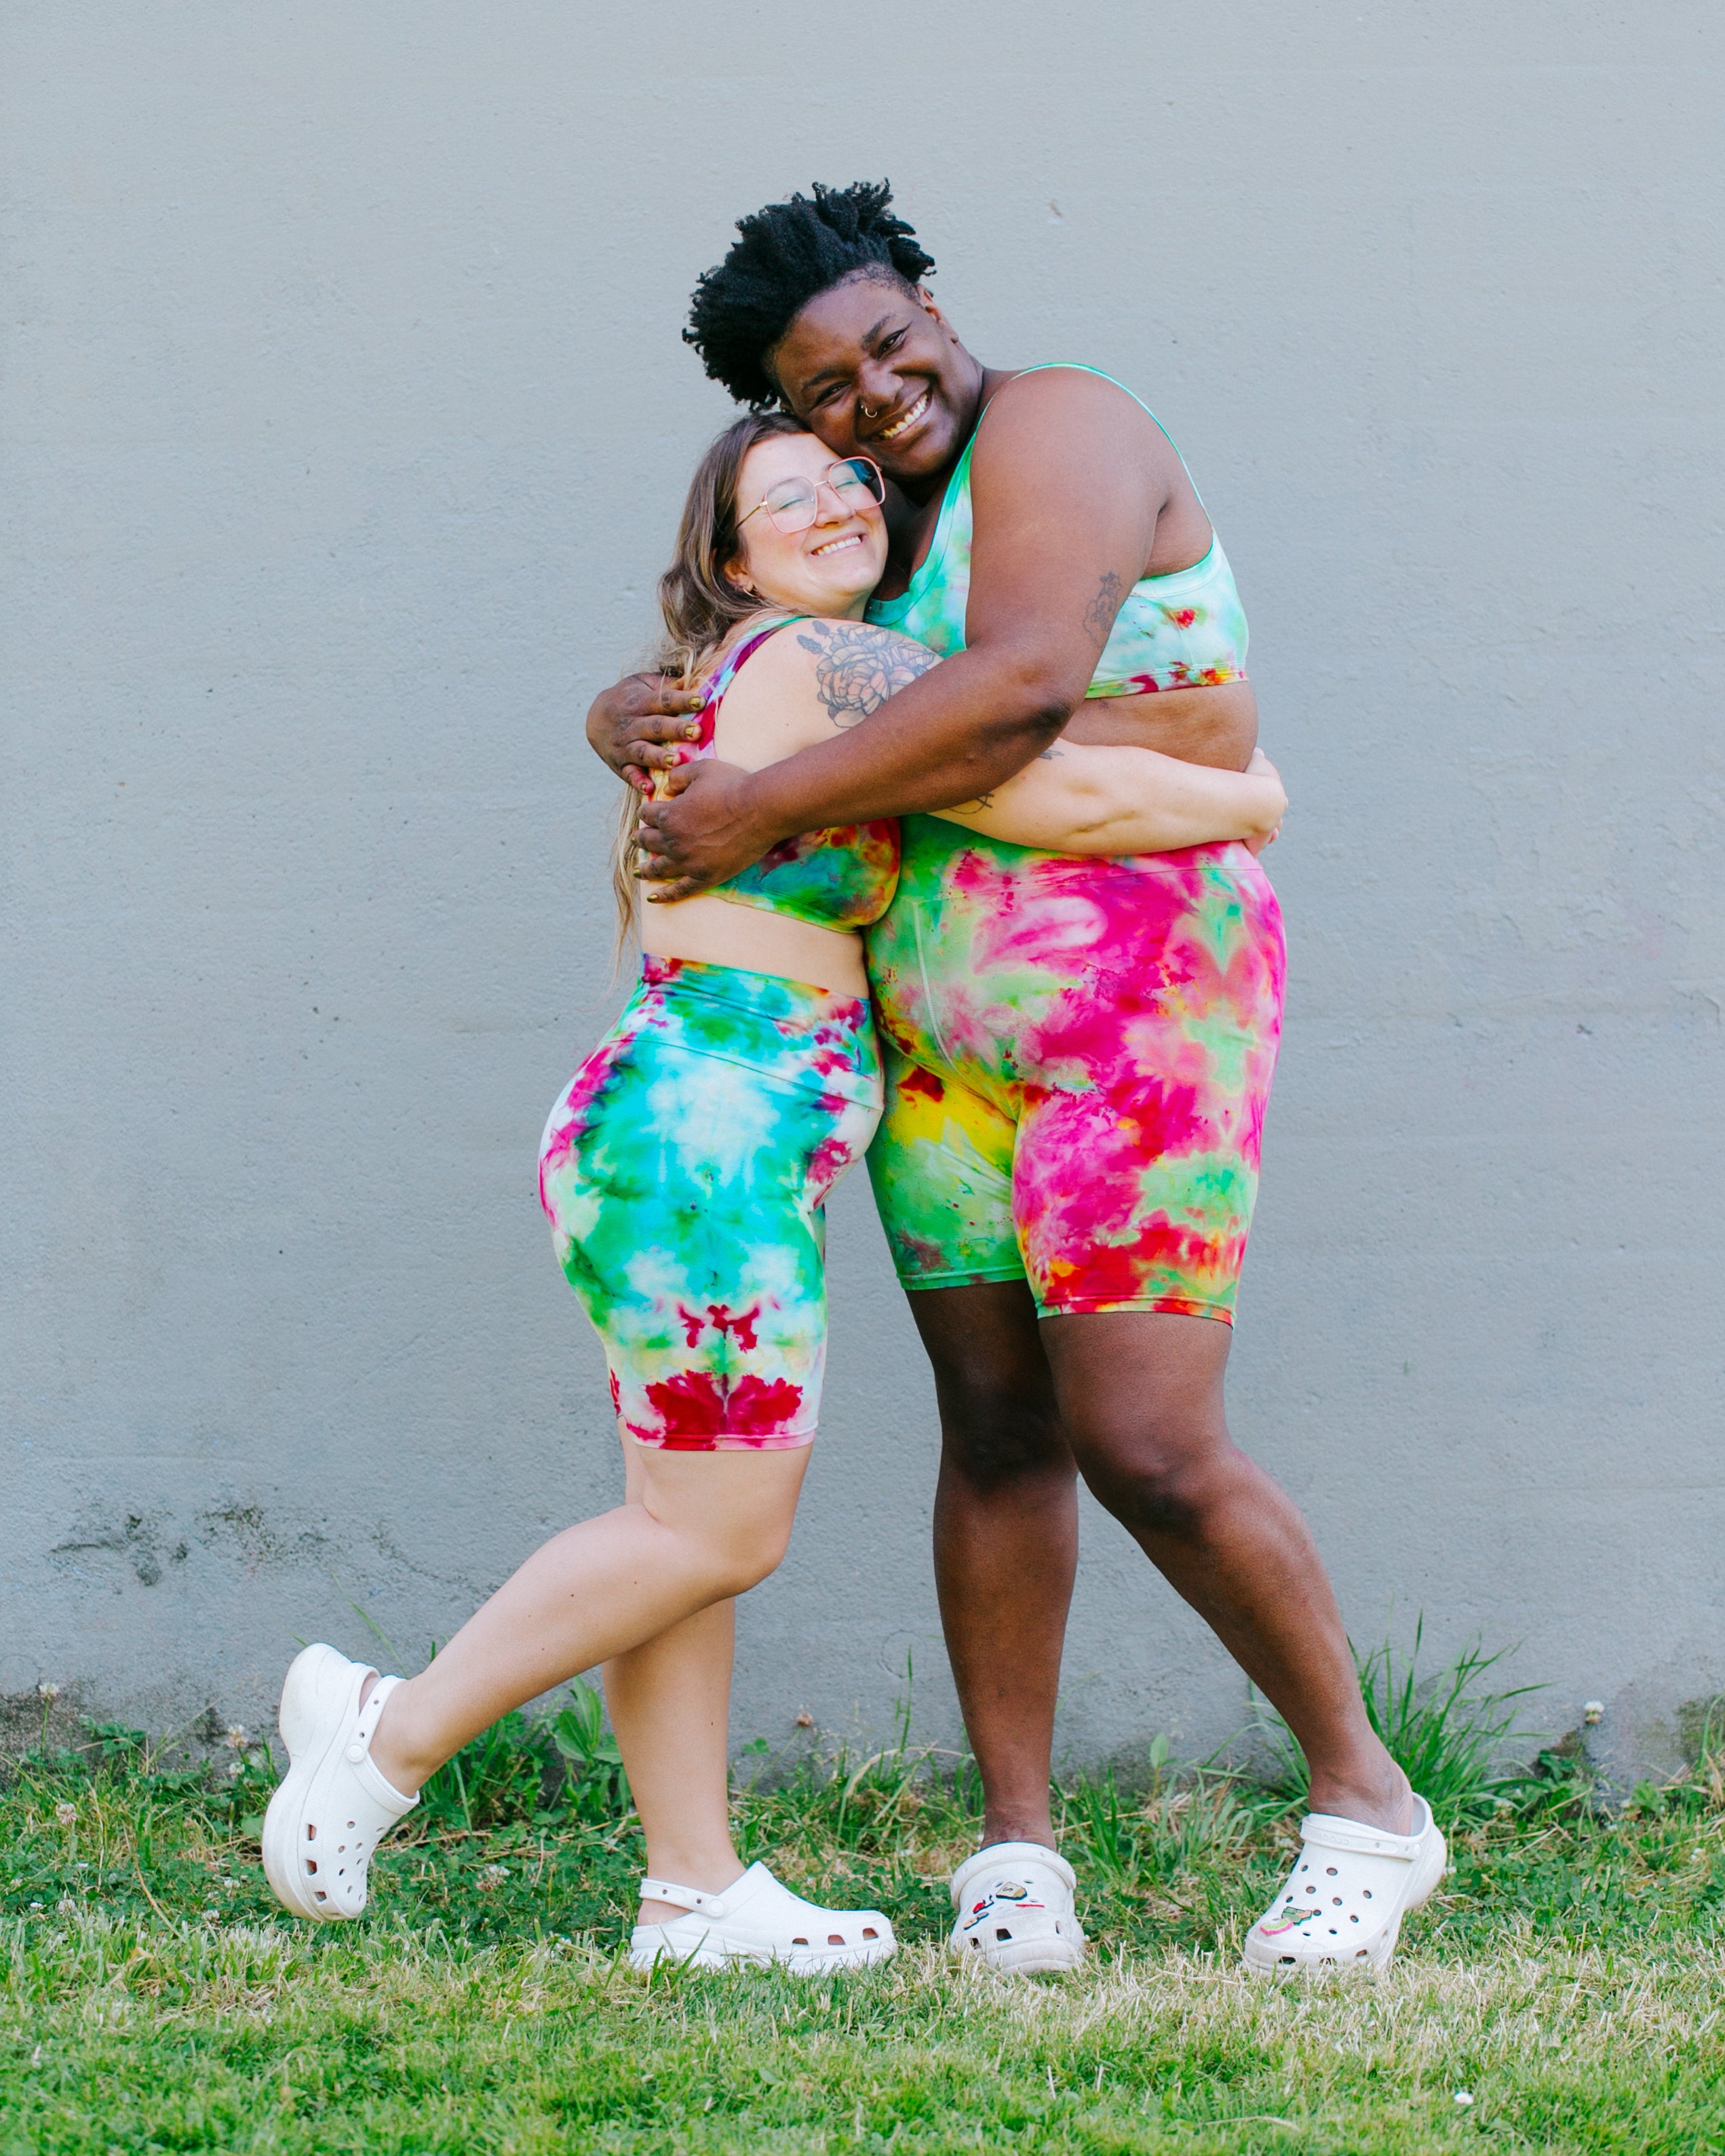 Two models smiling and hugging wearing sets of Ice Dyed Bike Shorts and Bralettes in a mix of green, pink, and yellow colors.